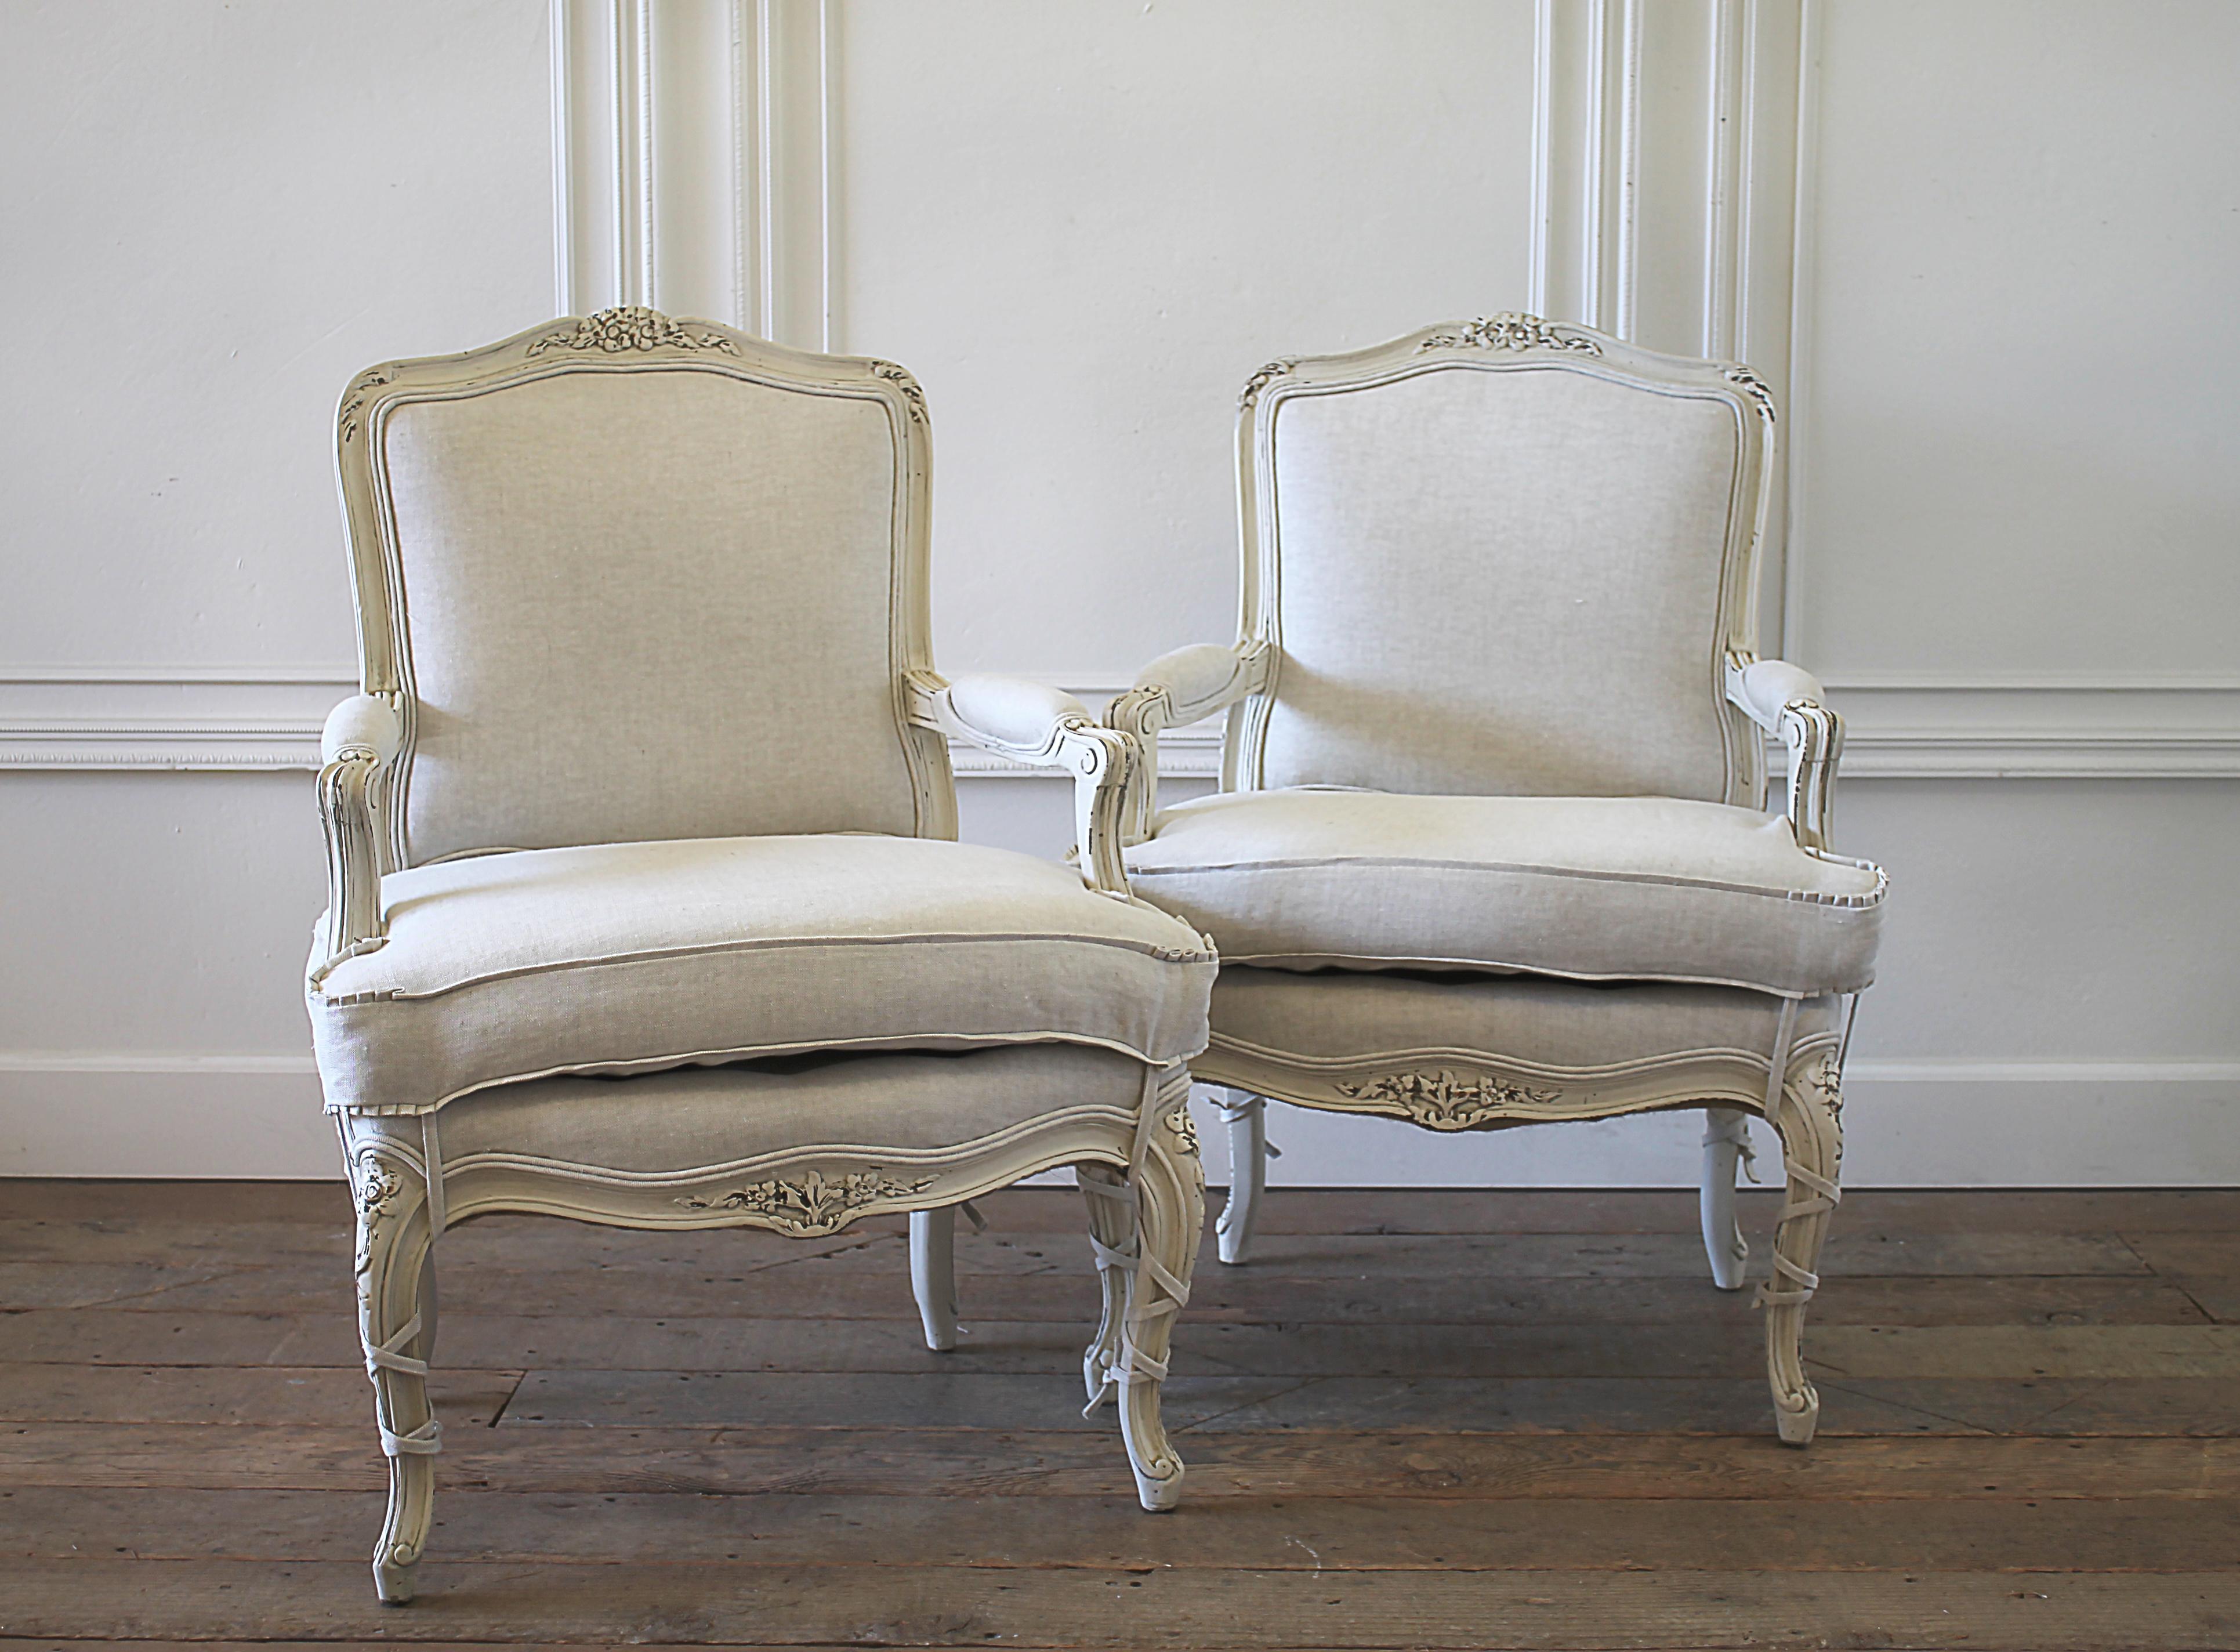 Pair of painted and upholstered Louis XVI style bergère chairs in natural linen. Painted in our soft oyster white, with subtle distressed edges, and finished with an antique glazed patina. This off white color blends beautifully with all shades of